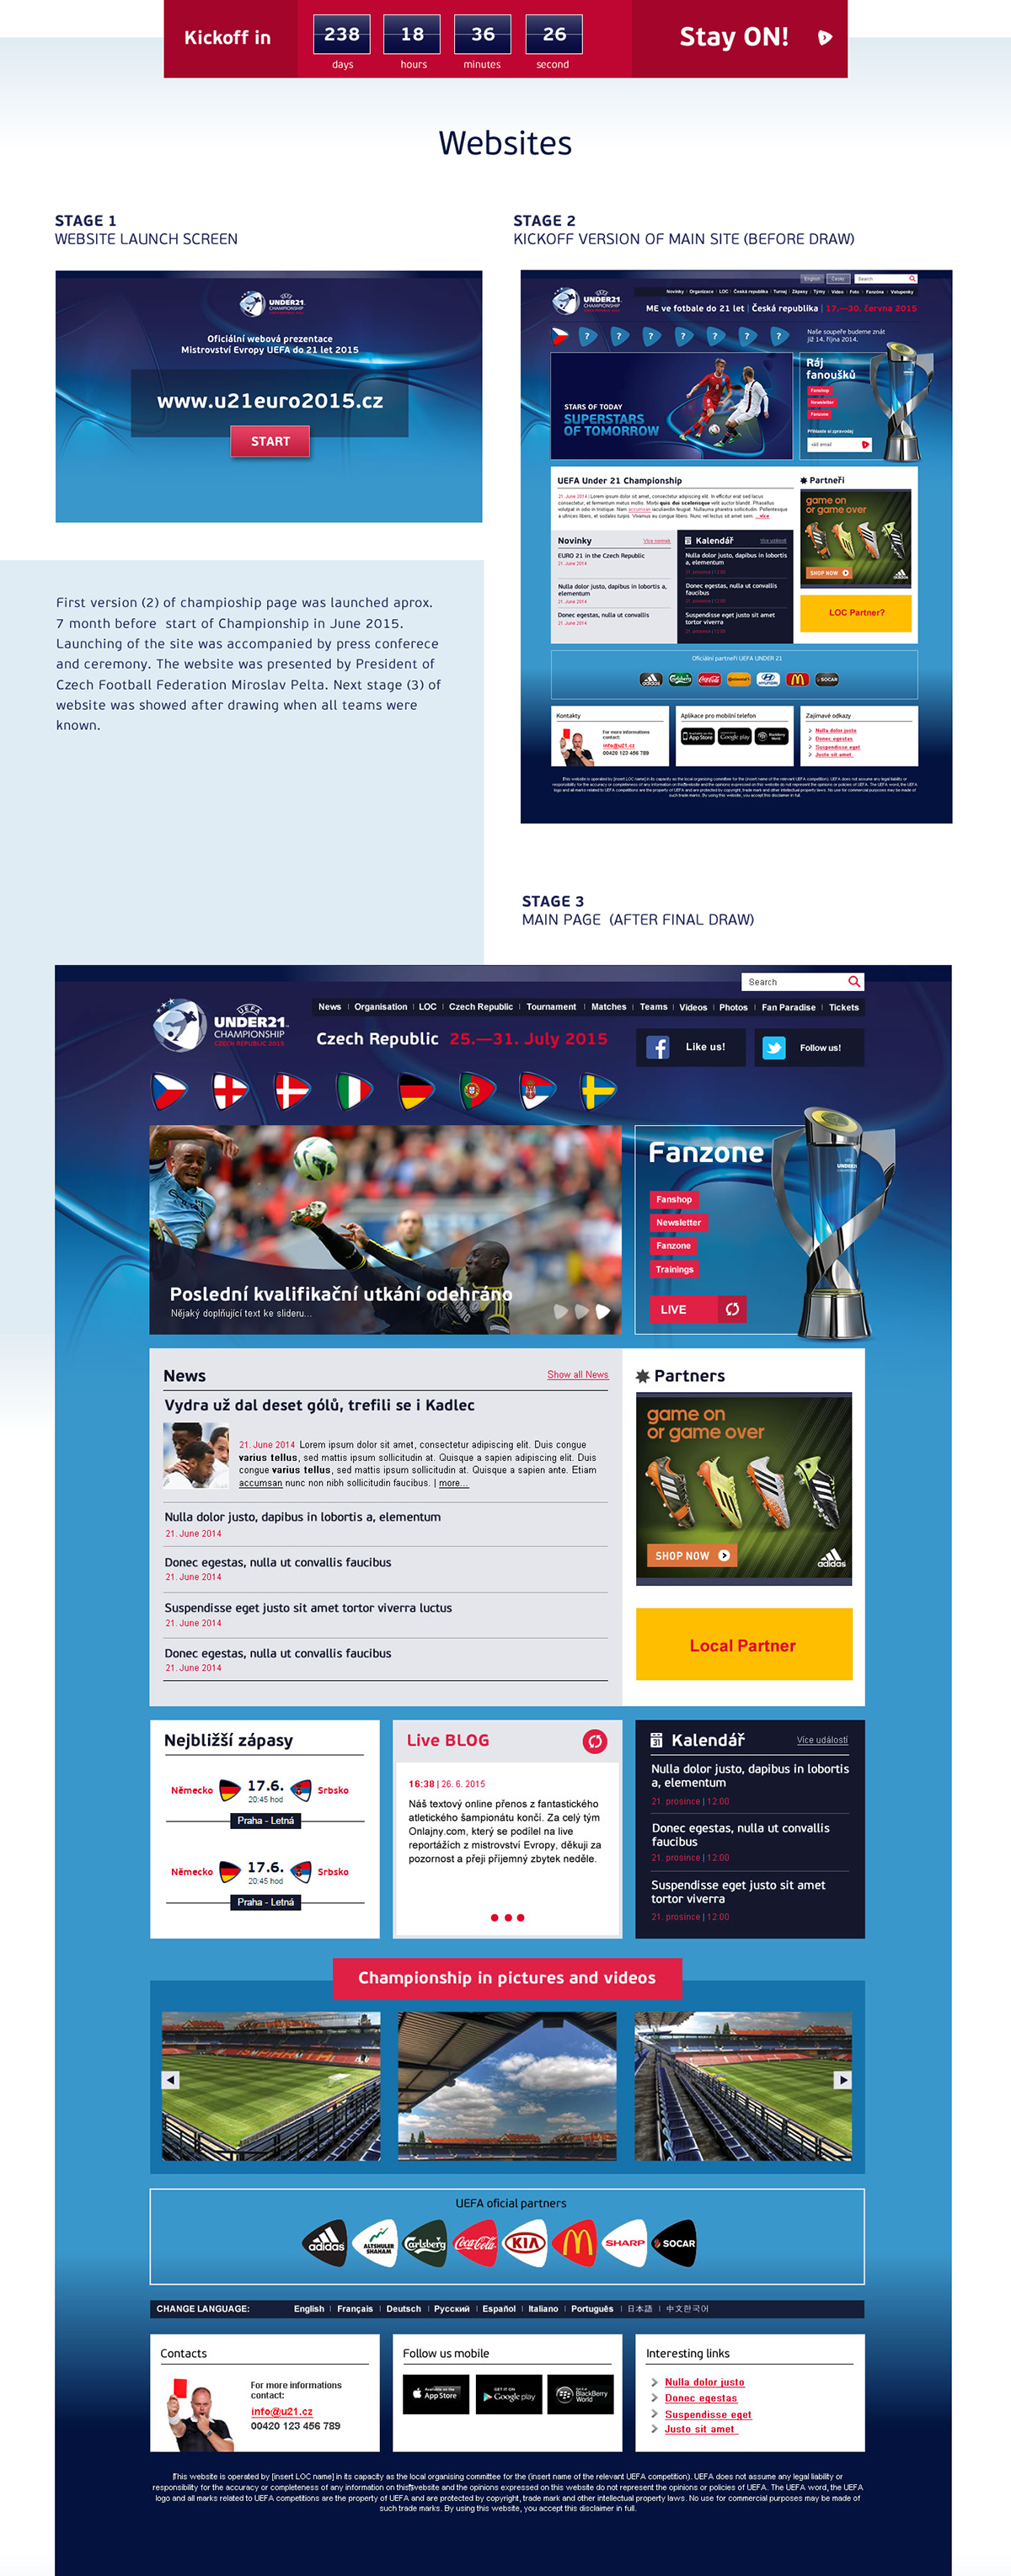 uefa EURO 2015 Championship Website Webdesign Responsive visual identity ux user experience online strategy